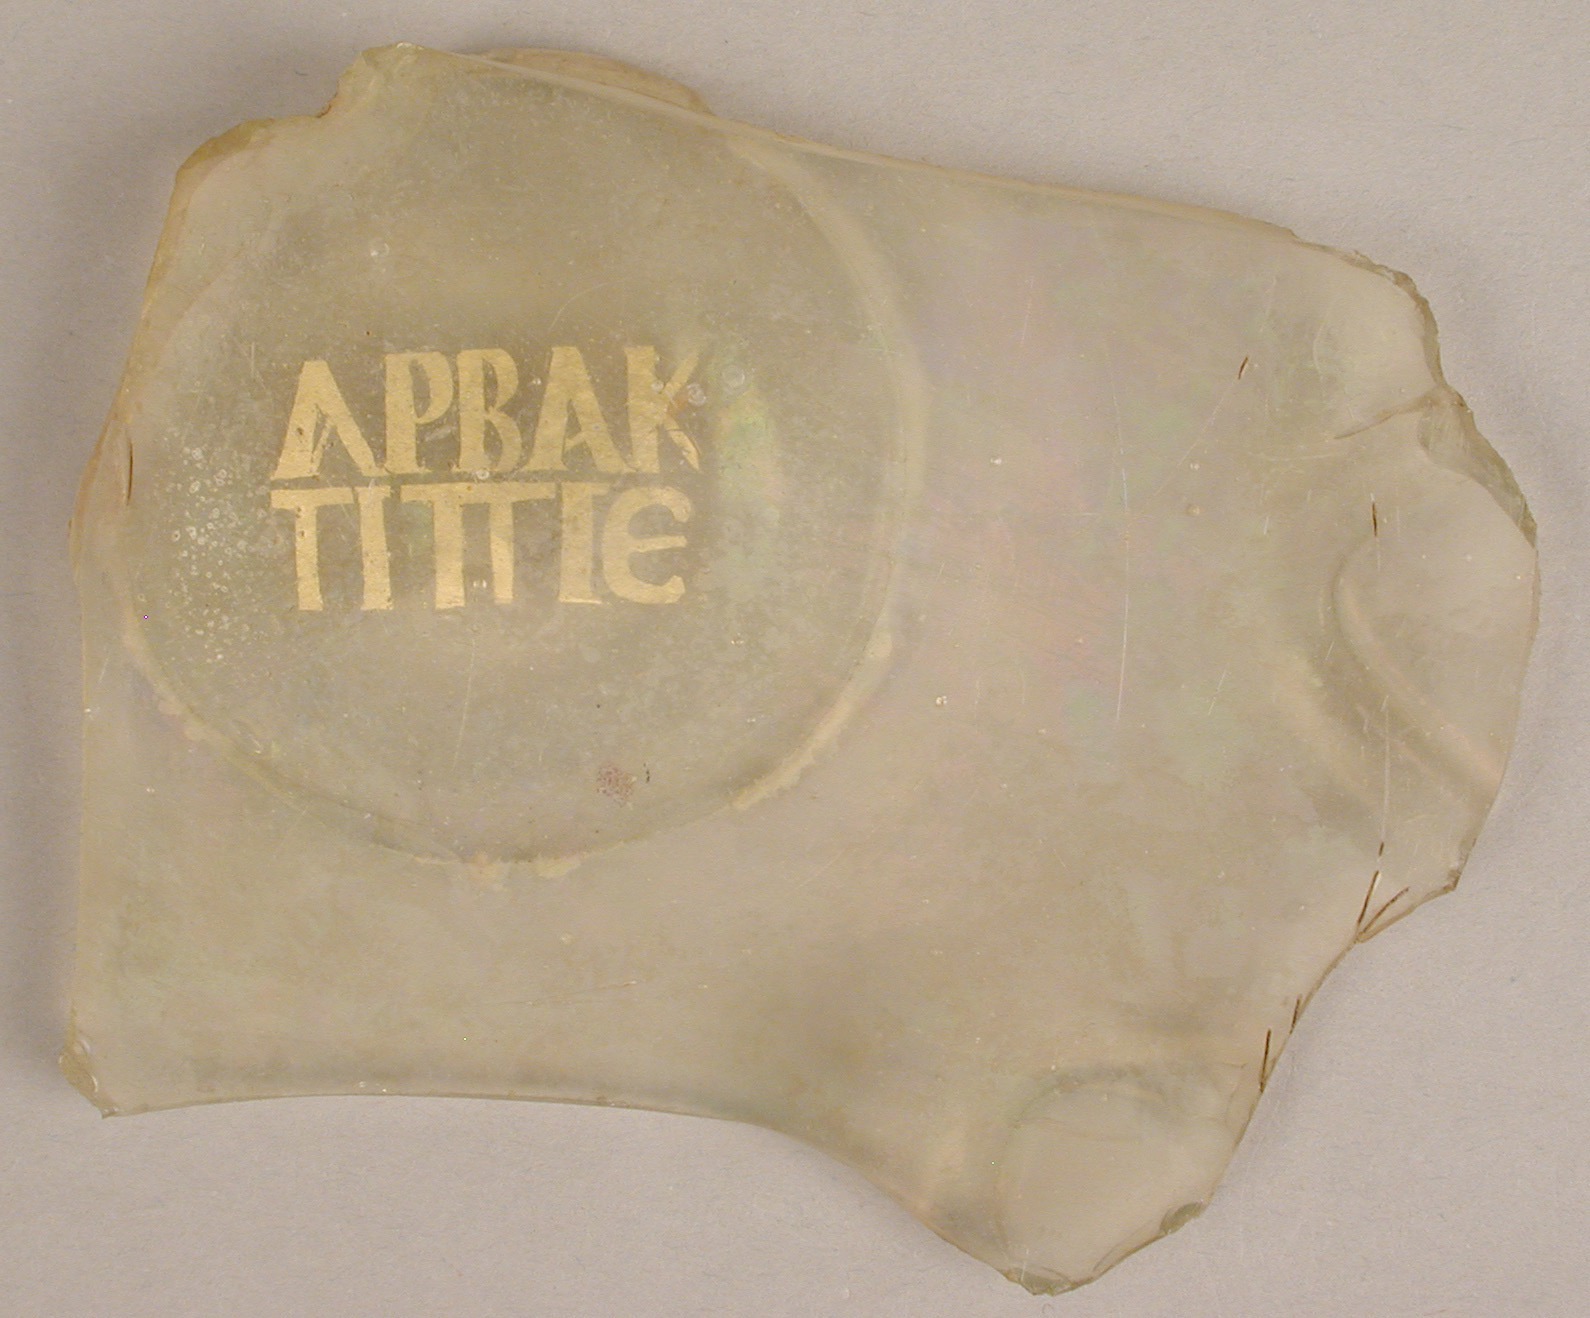 Ancient Roman glass bowl fragment with gold leaf lettering, c. 3rd century CE..jpg